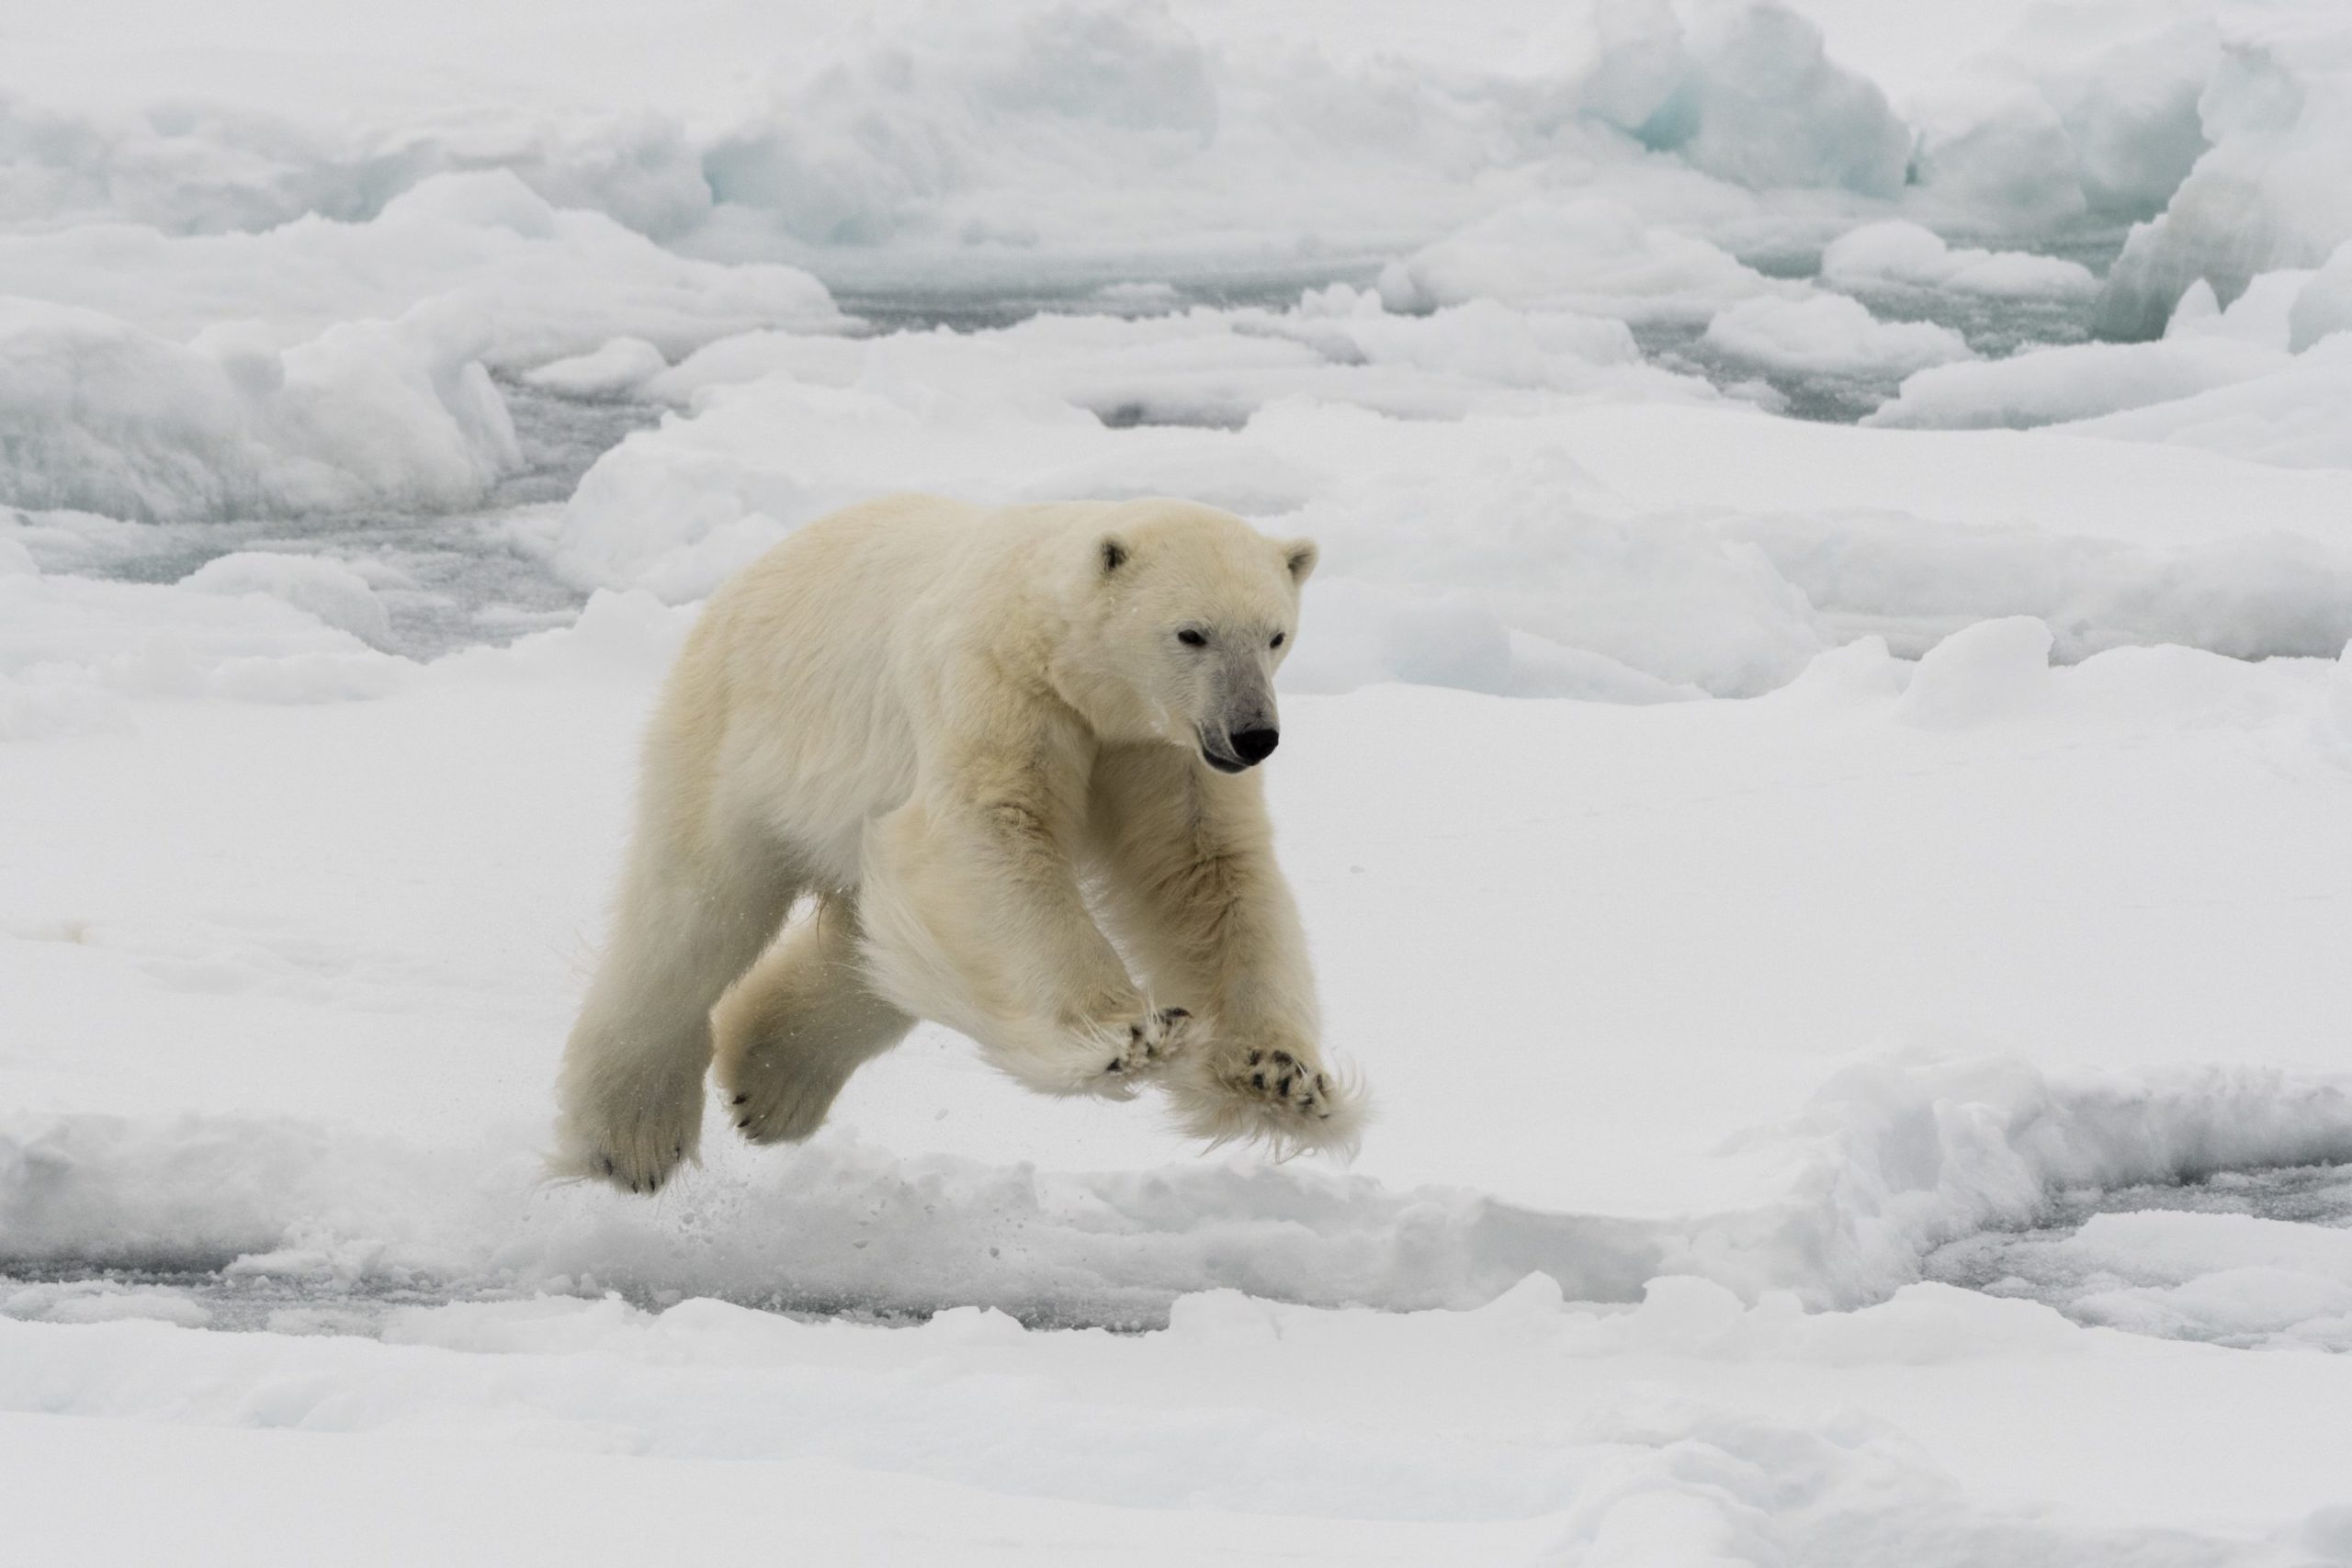 A group of polar bears in Greenland adjust their hunting practices to adapt to climate change